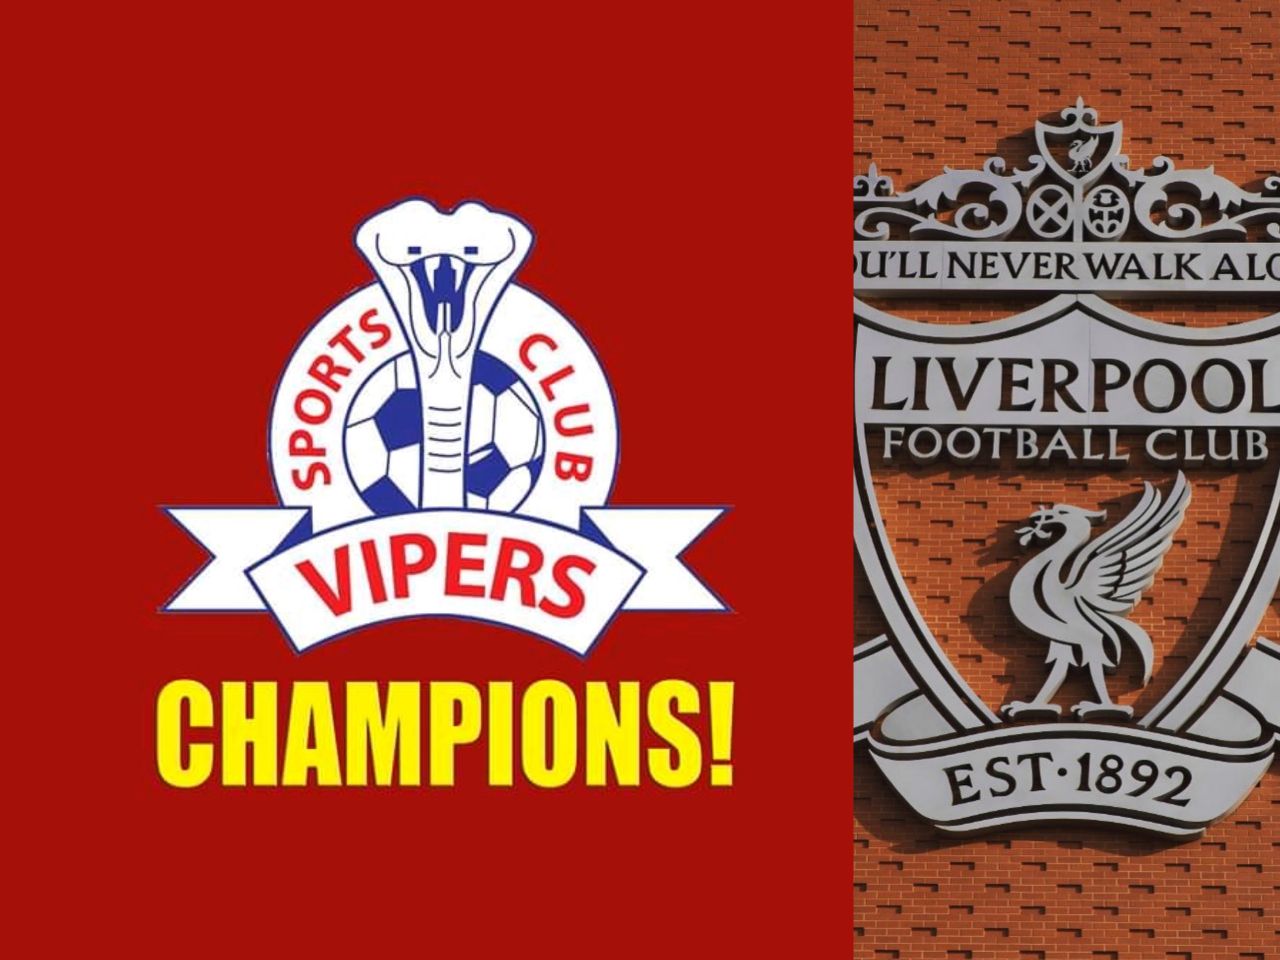 Vipers Snatches the Uganda Premier League as Liverpool fans wait for their share of the party